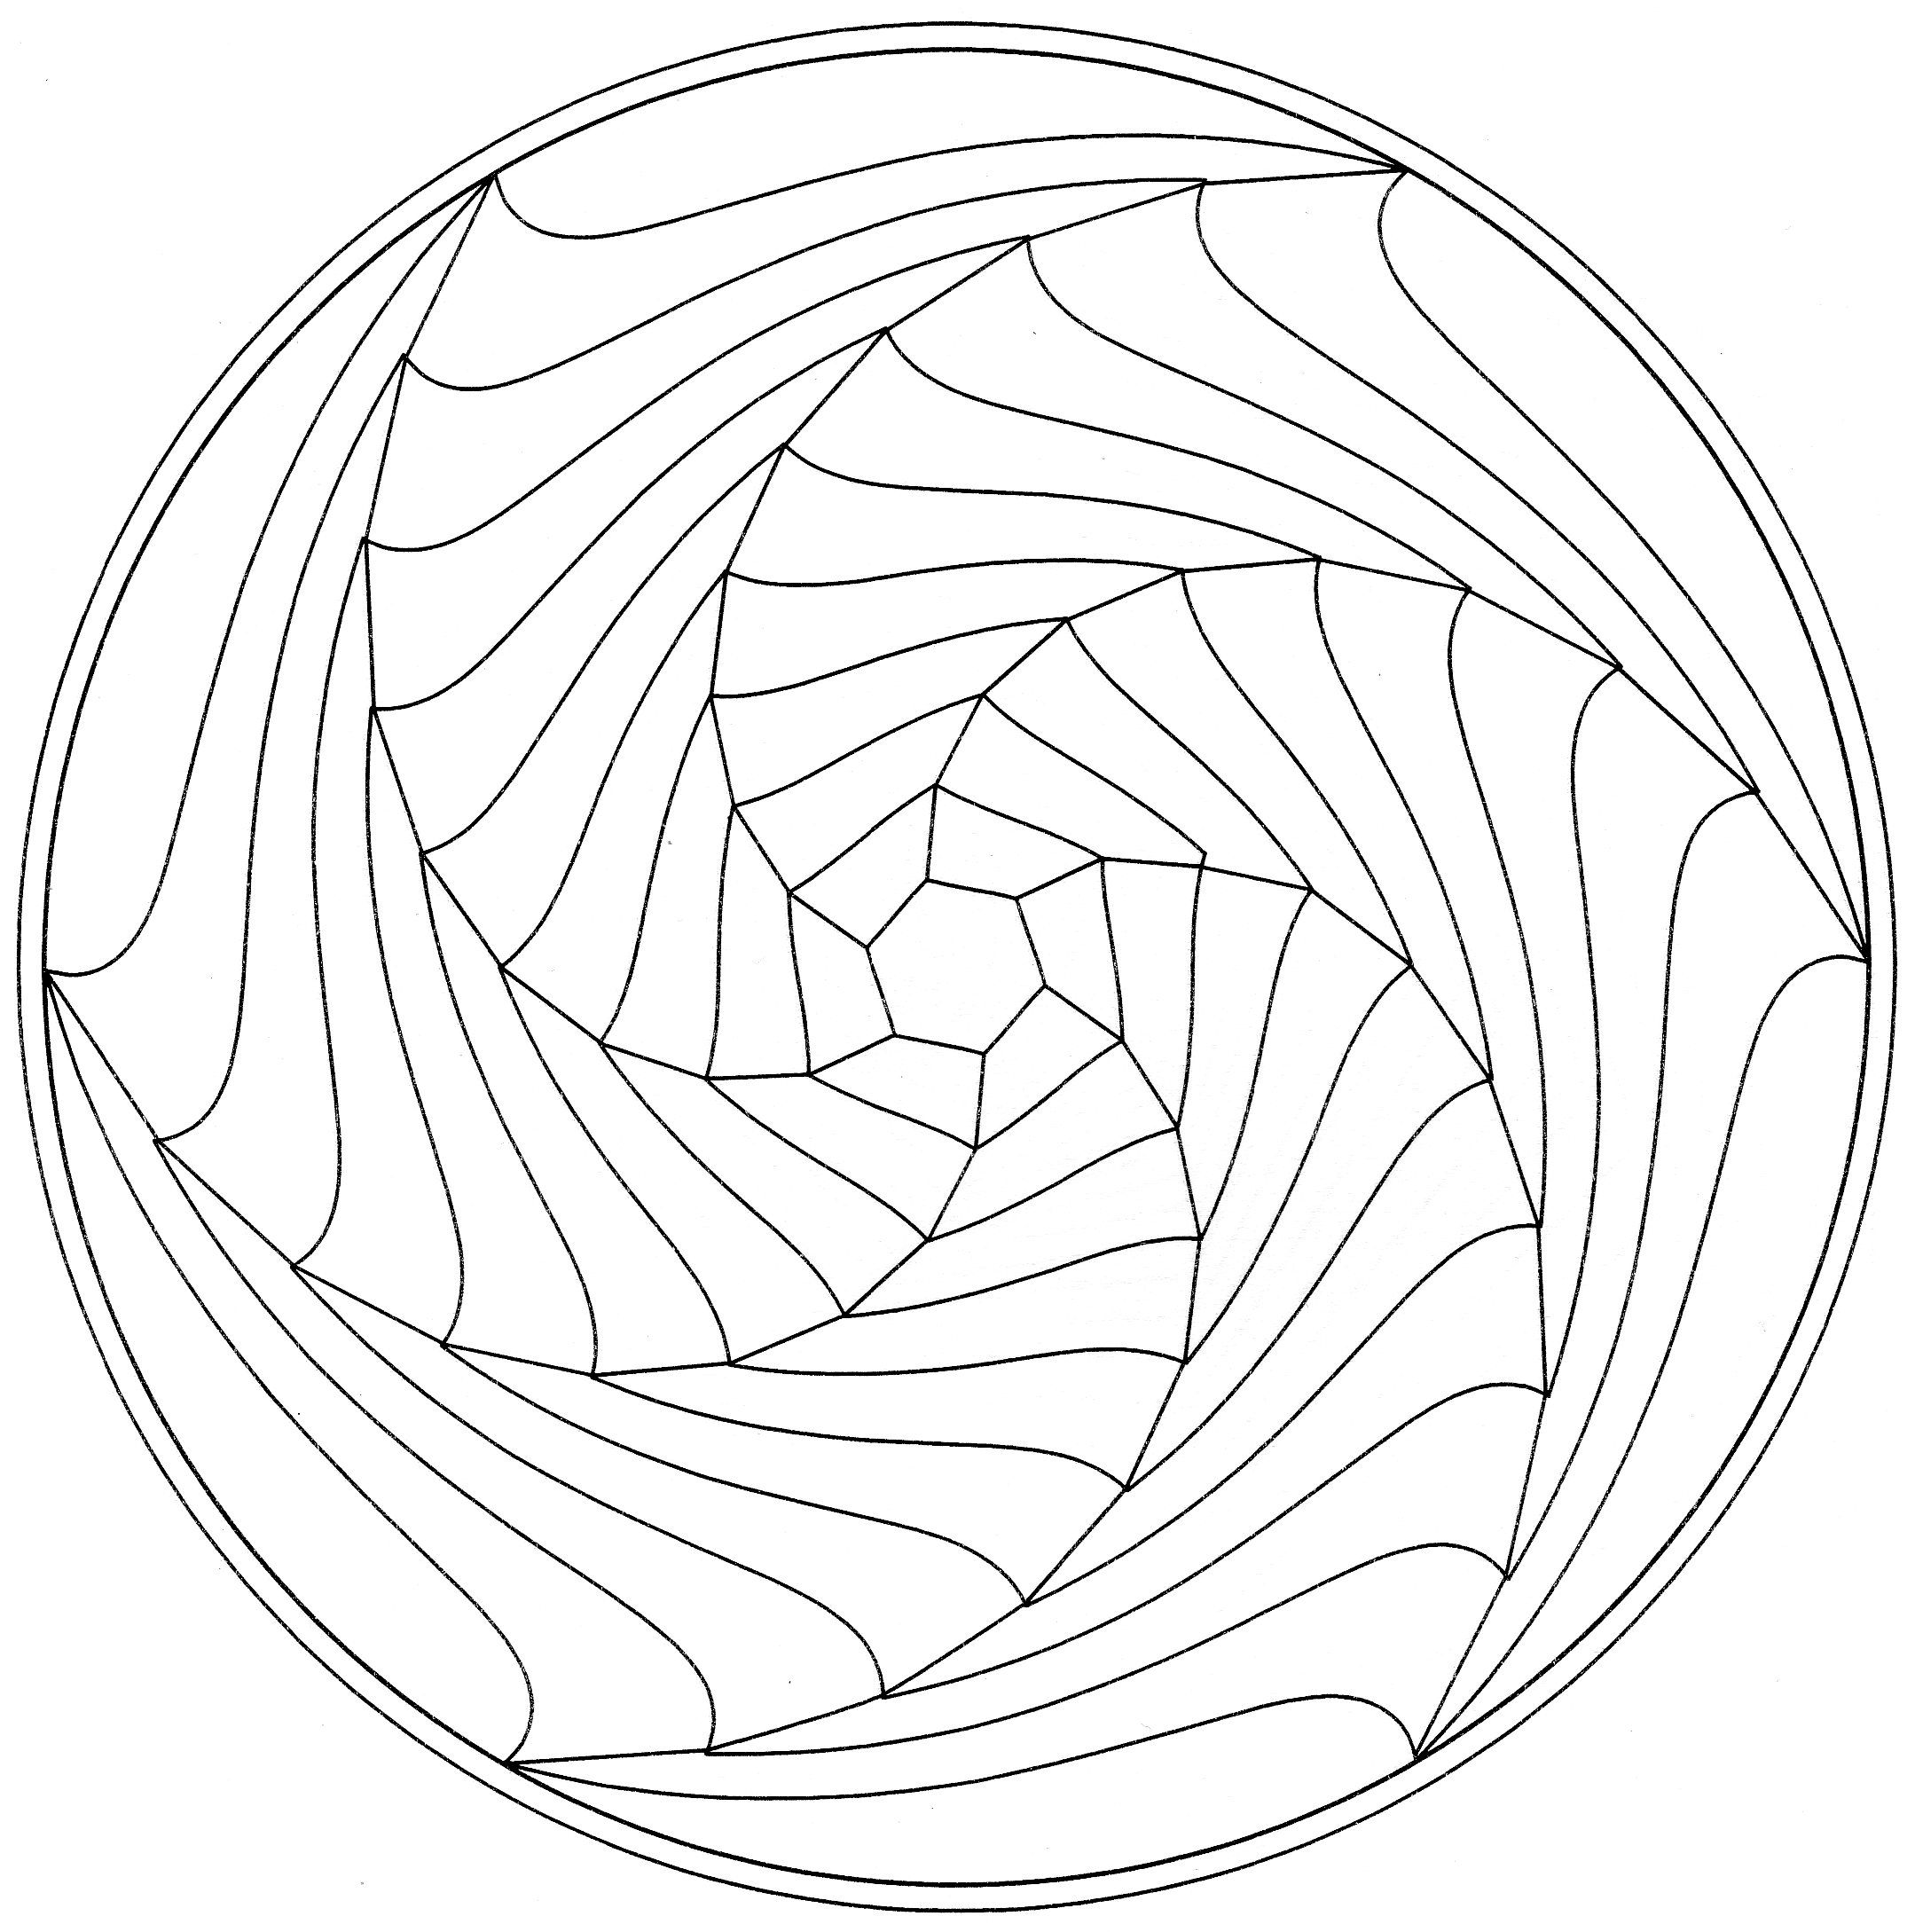 Spiral Coloring Pages - Coloring Home